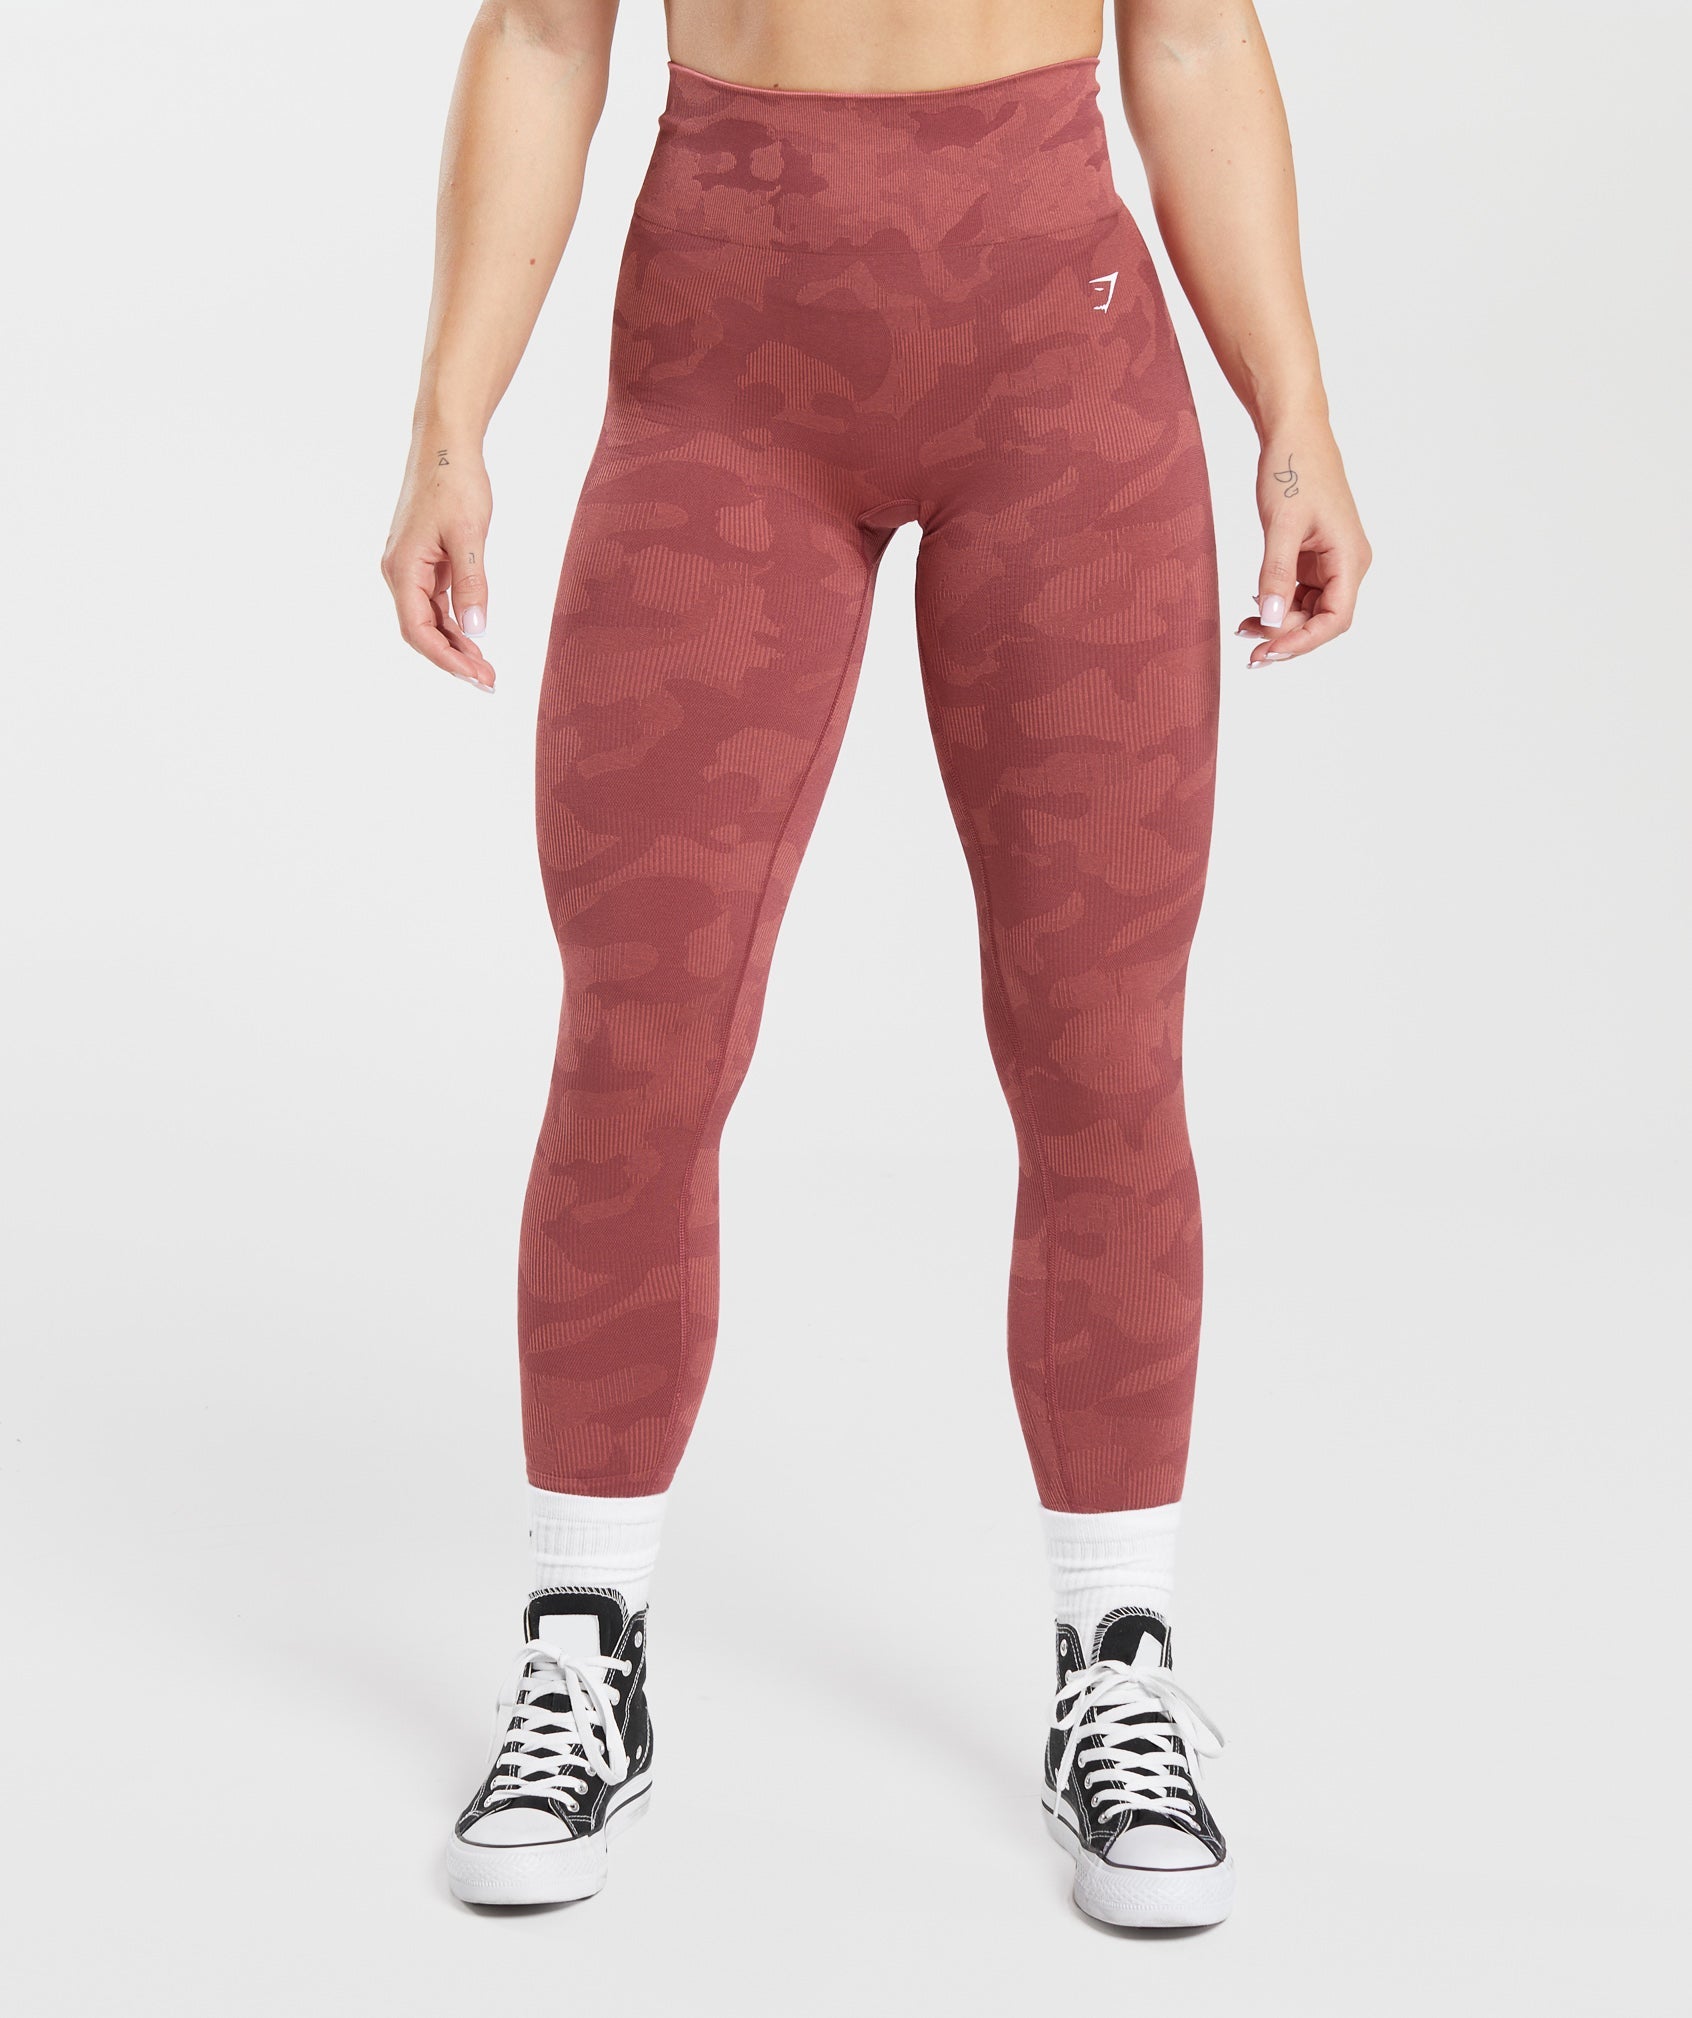 Adapt Camo Seamless Leggings in Soft Berry/Sunbaked Pink